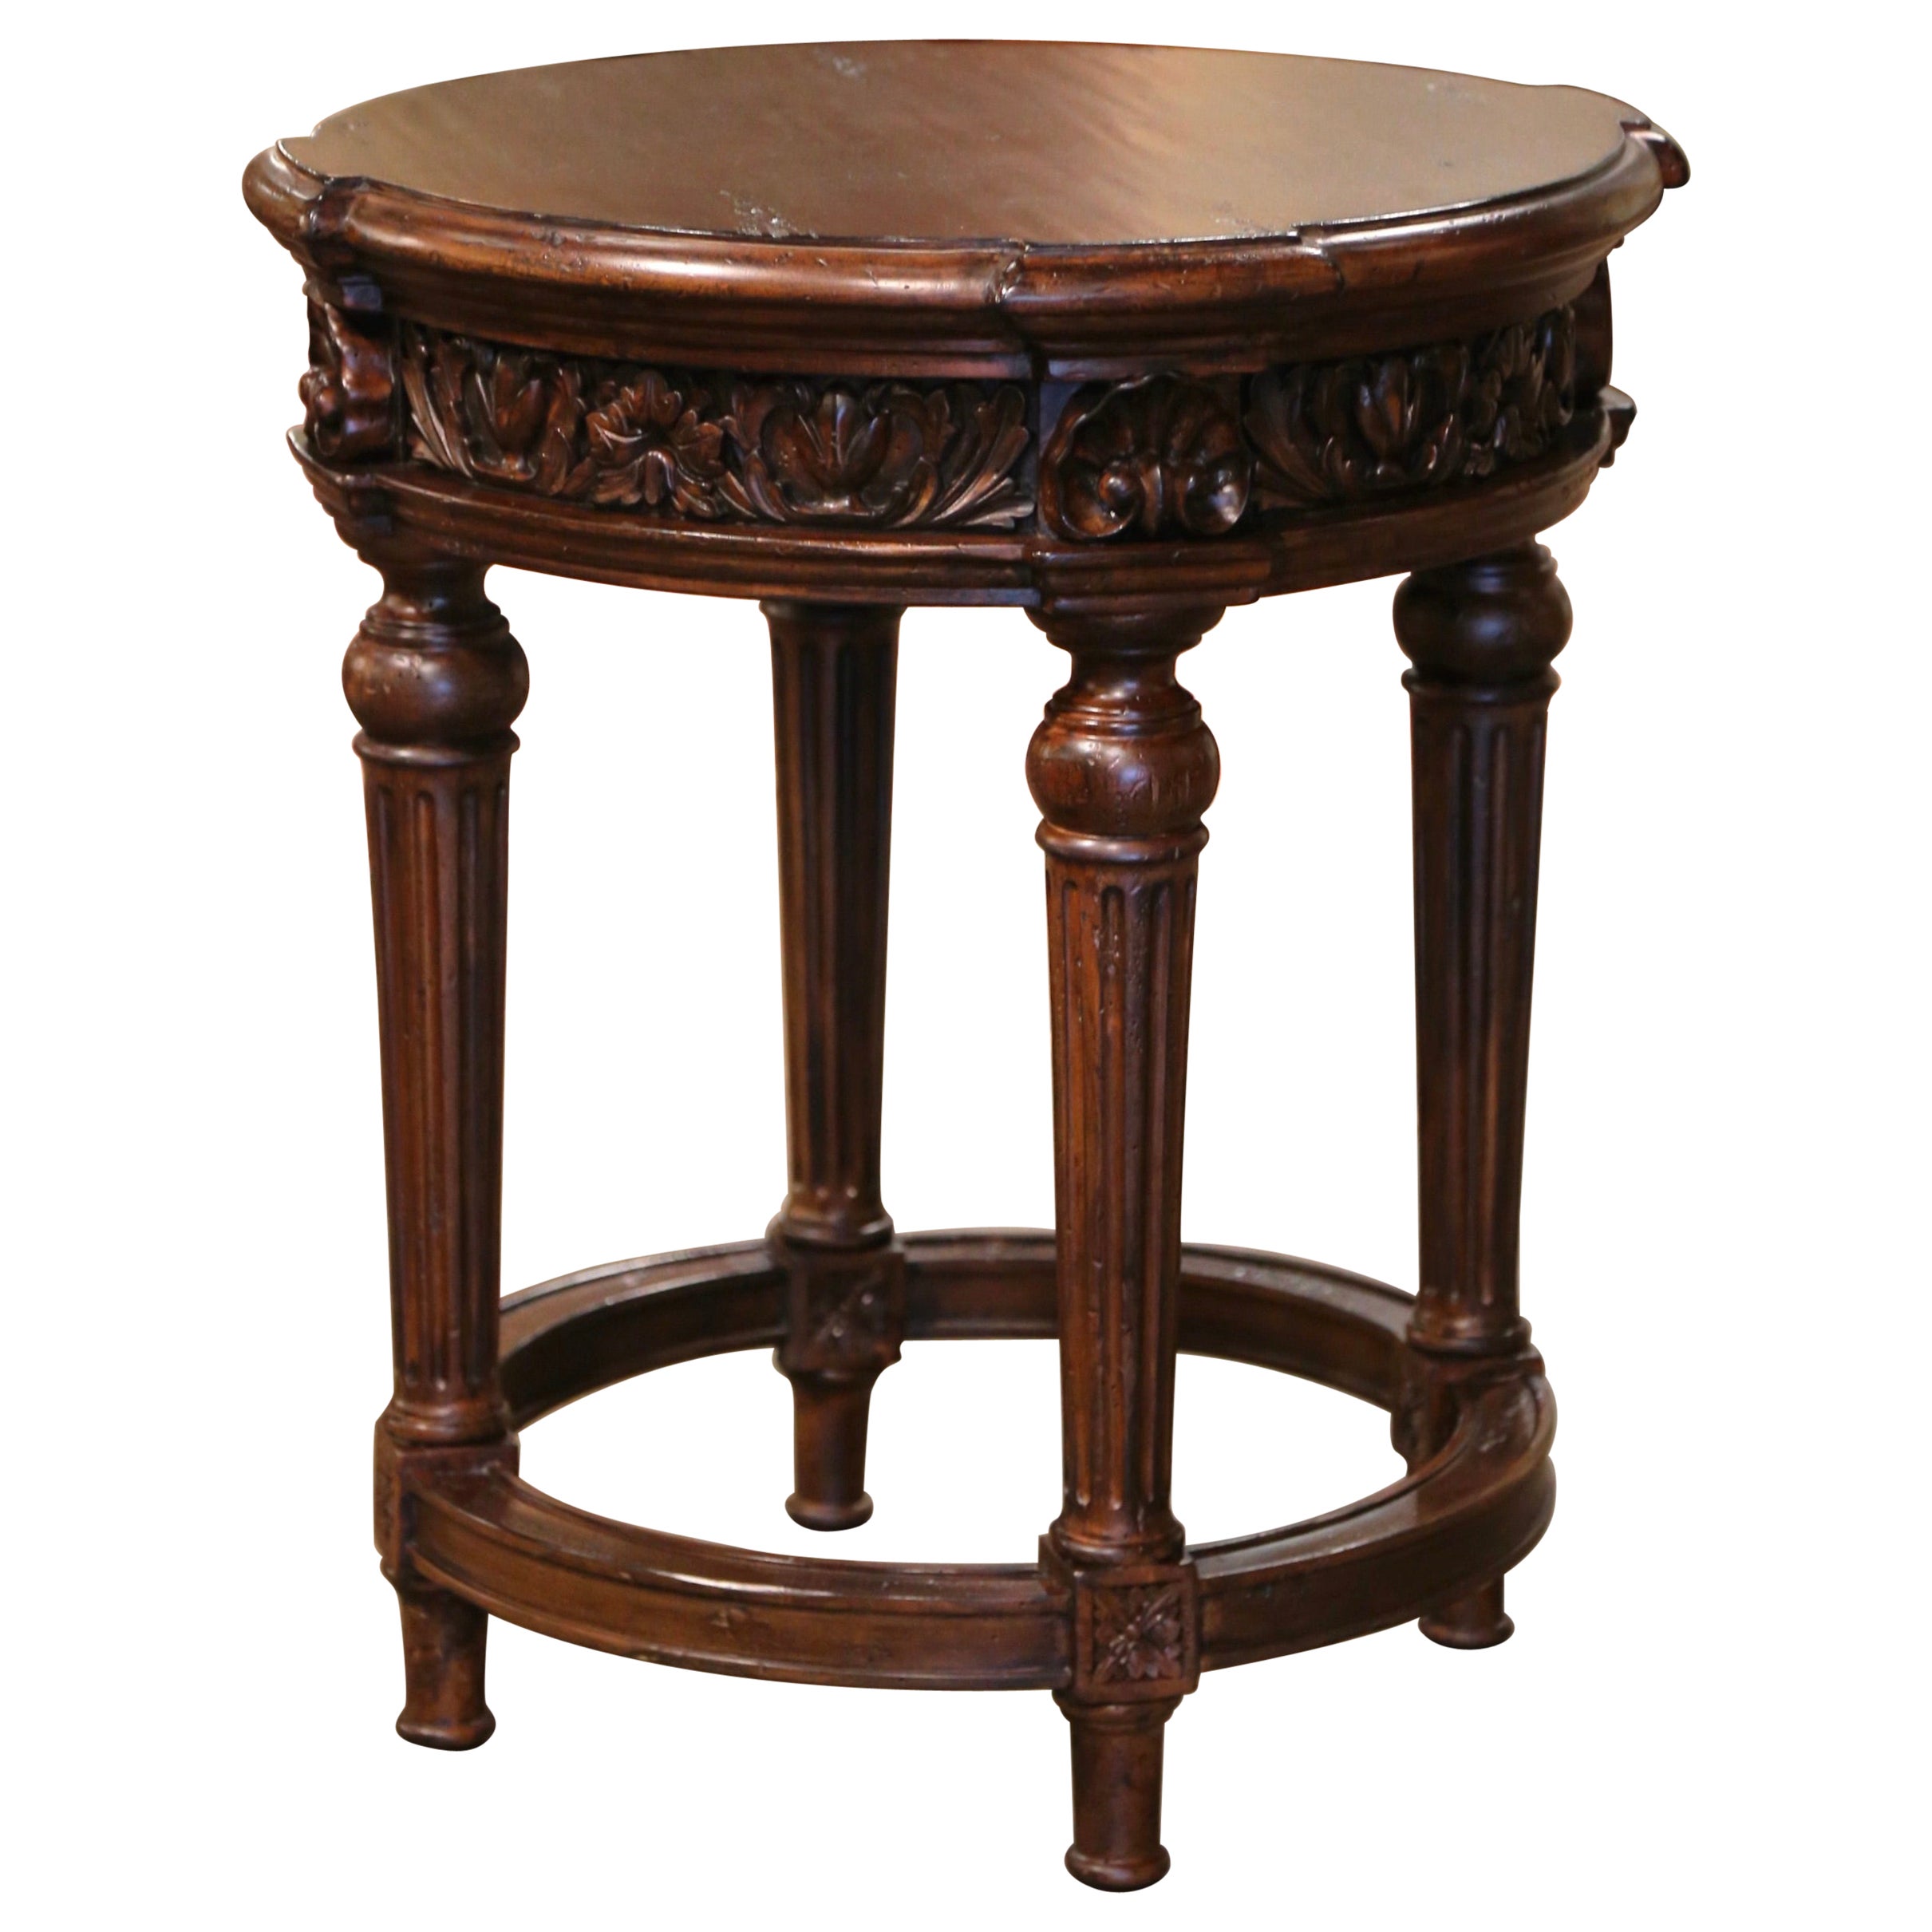 Vintage Louis XVI Style Carved Walnut Gueridon Side Table from Habersham